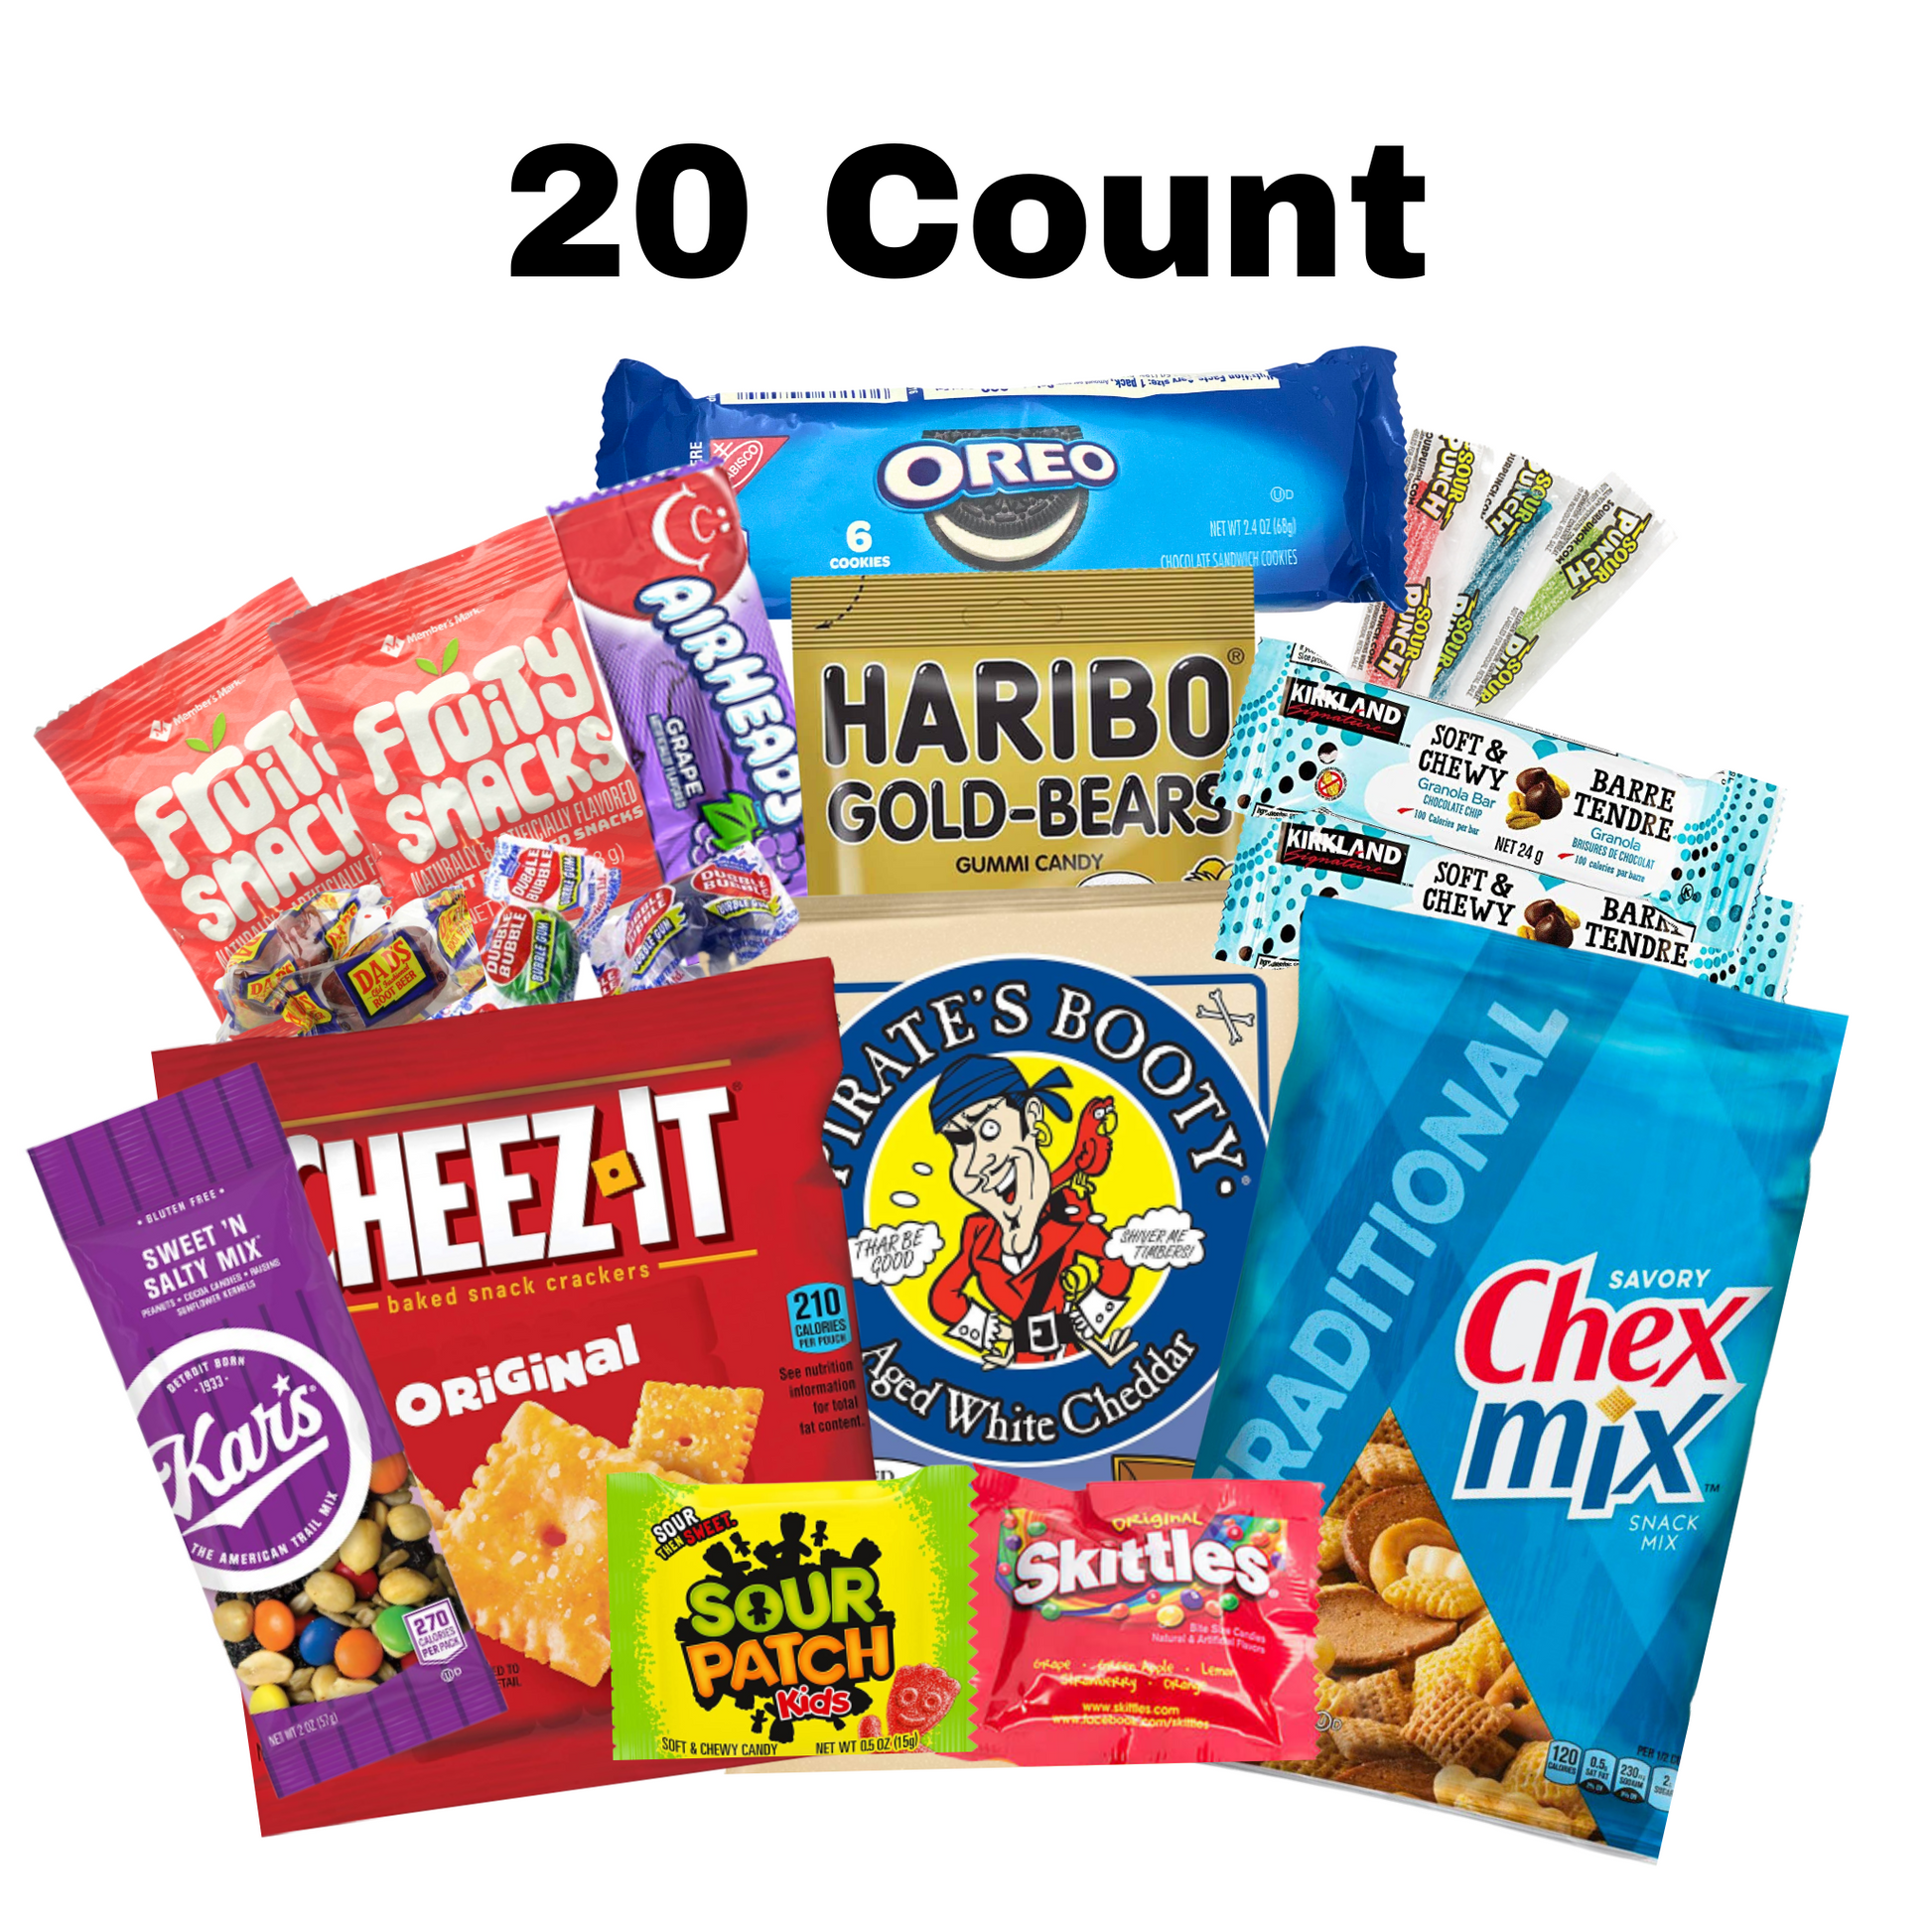 Kids SnackBOX Care Package with Candy and Snacks (24 Count)